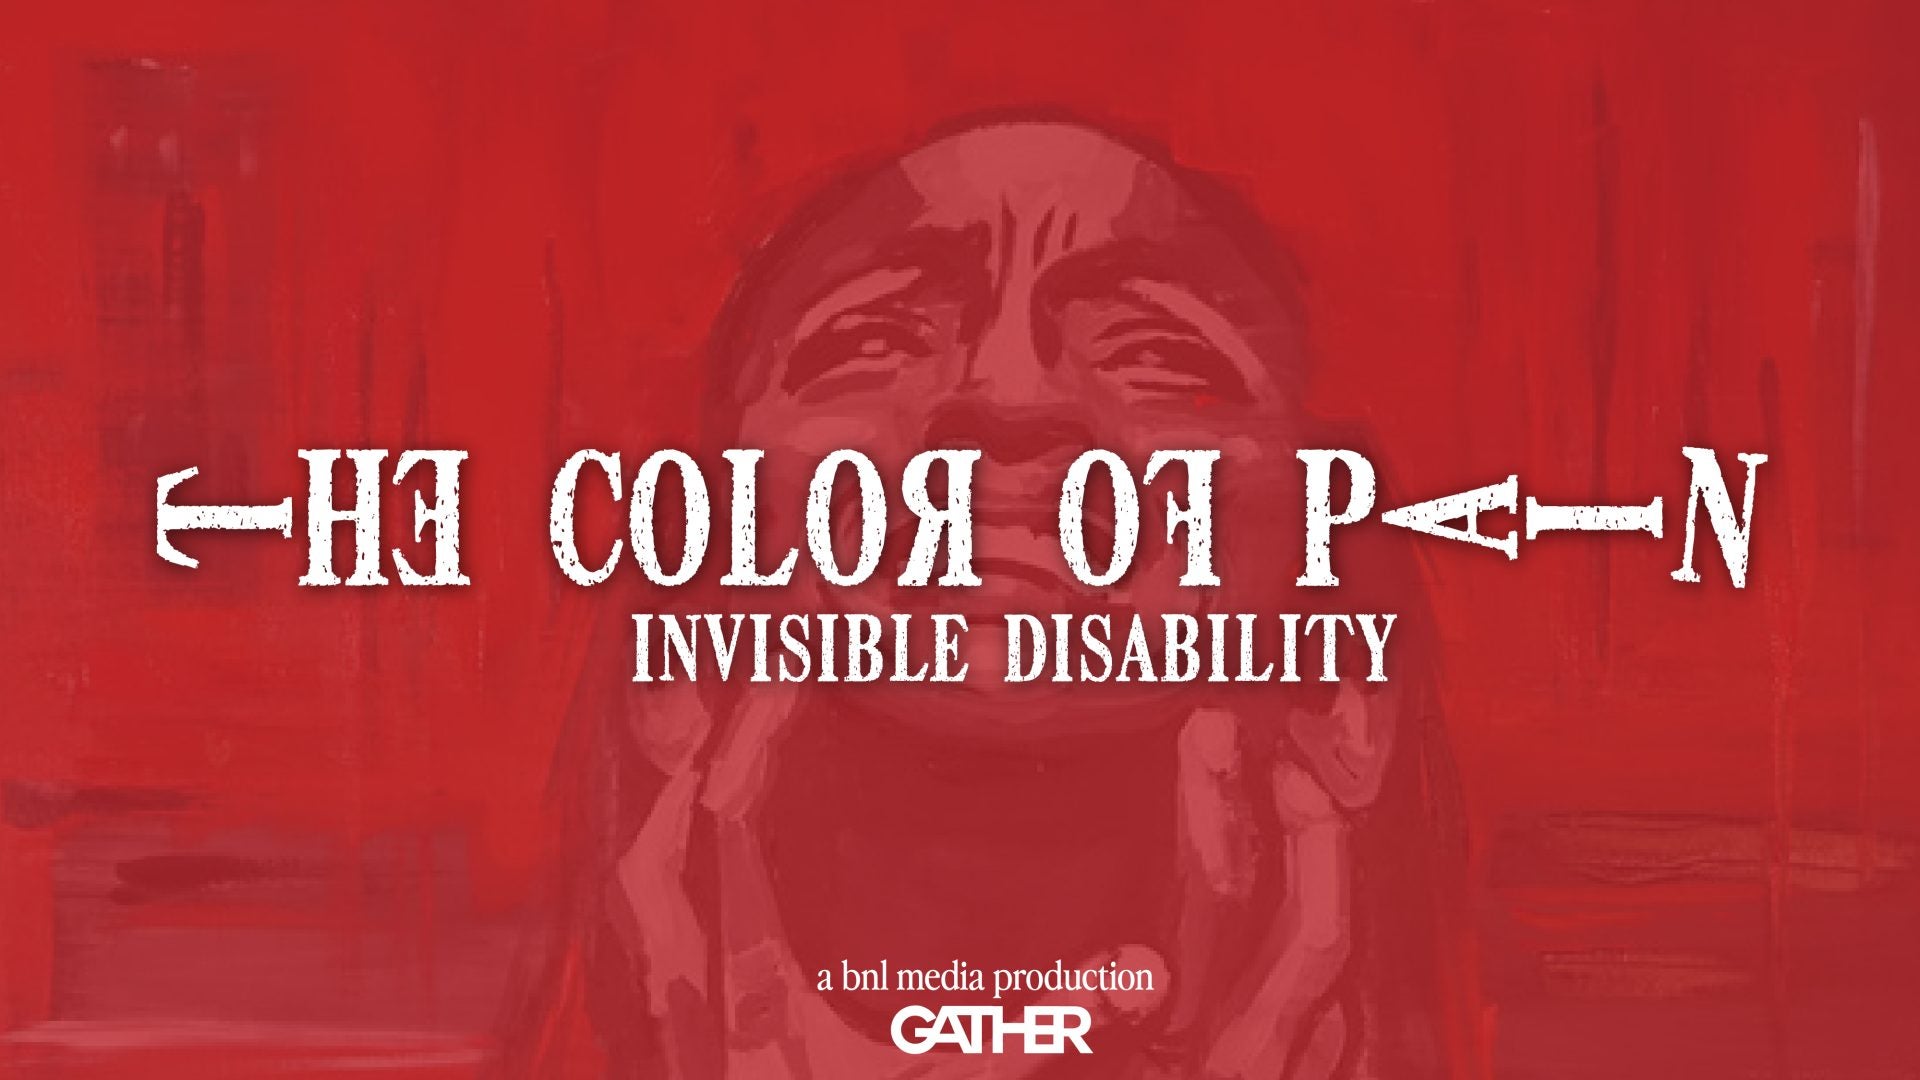 New Documentary “The Color Of Pain” Tells The Story Of Black Women Living With Invisible Disabilities